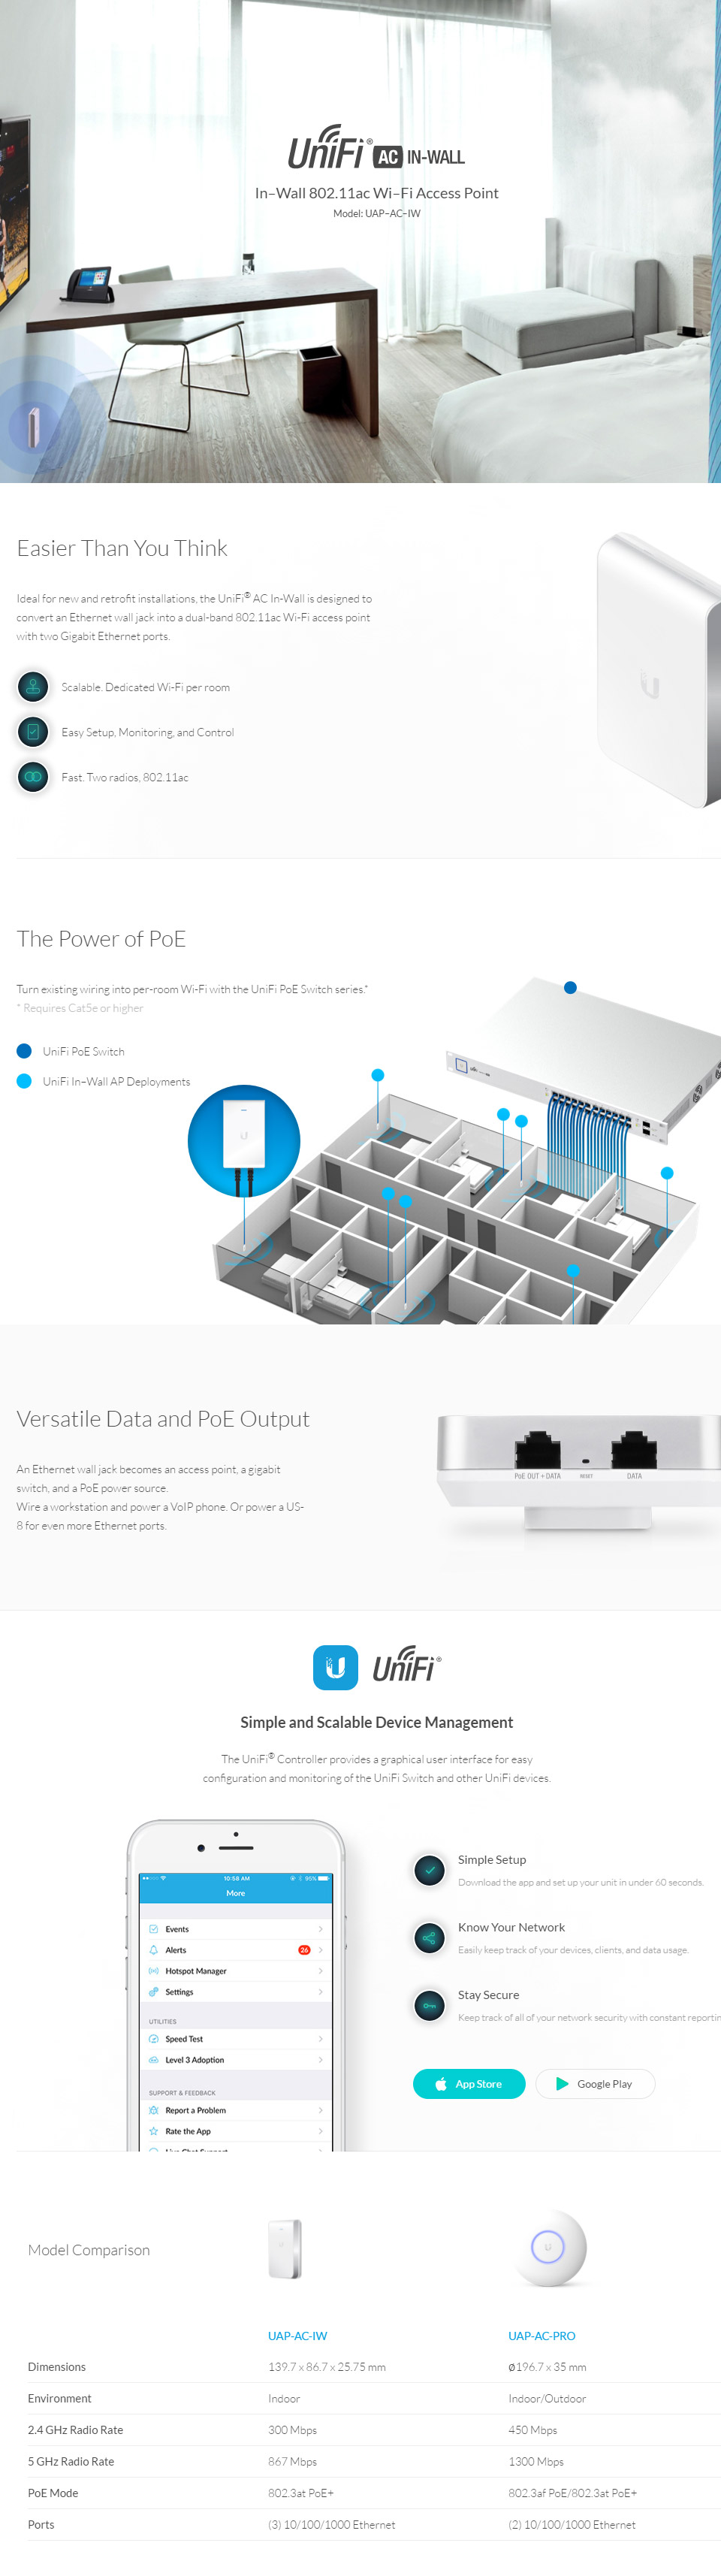 A large marketing image providing additional information about the product Ubiquiti UniFi AC In-Wall Access Point - Additional alt info not provided